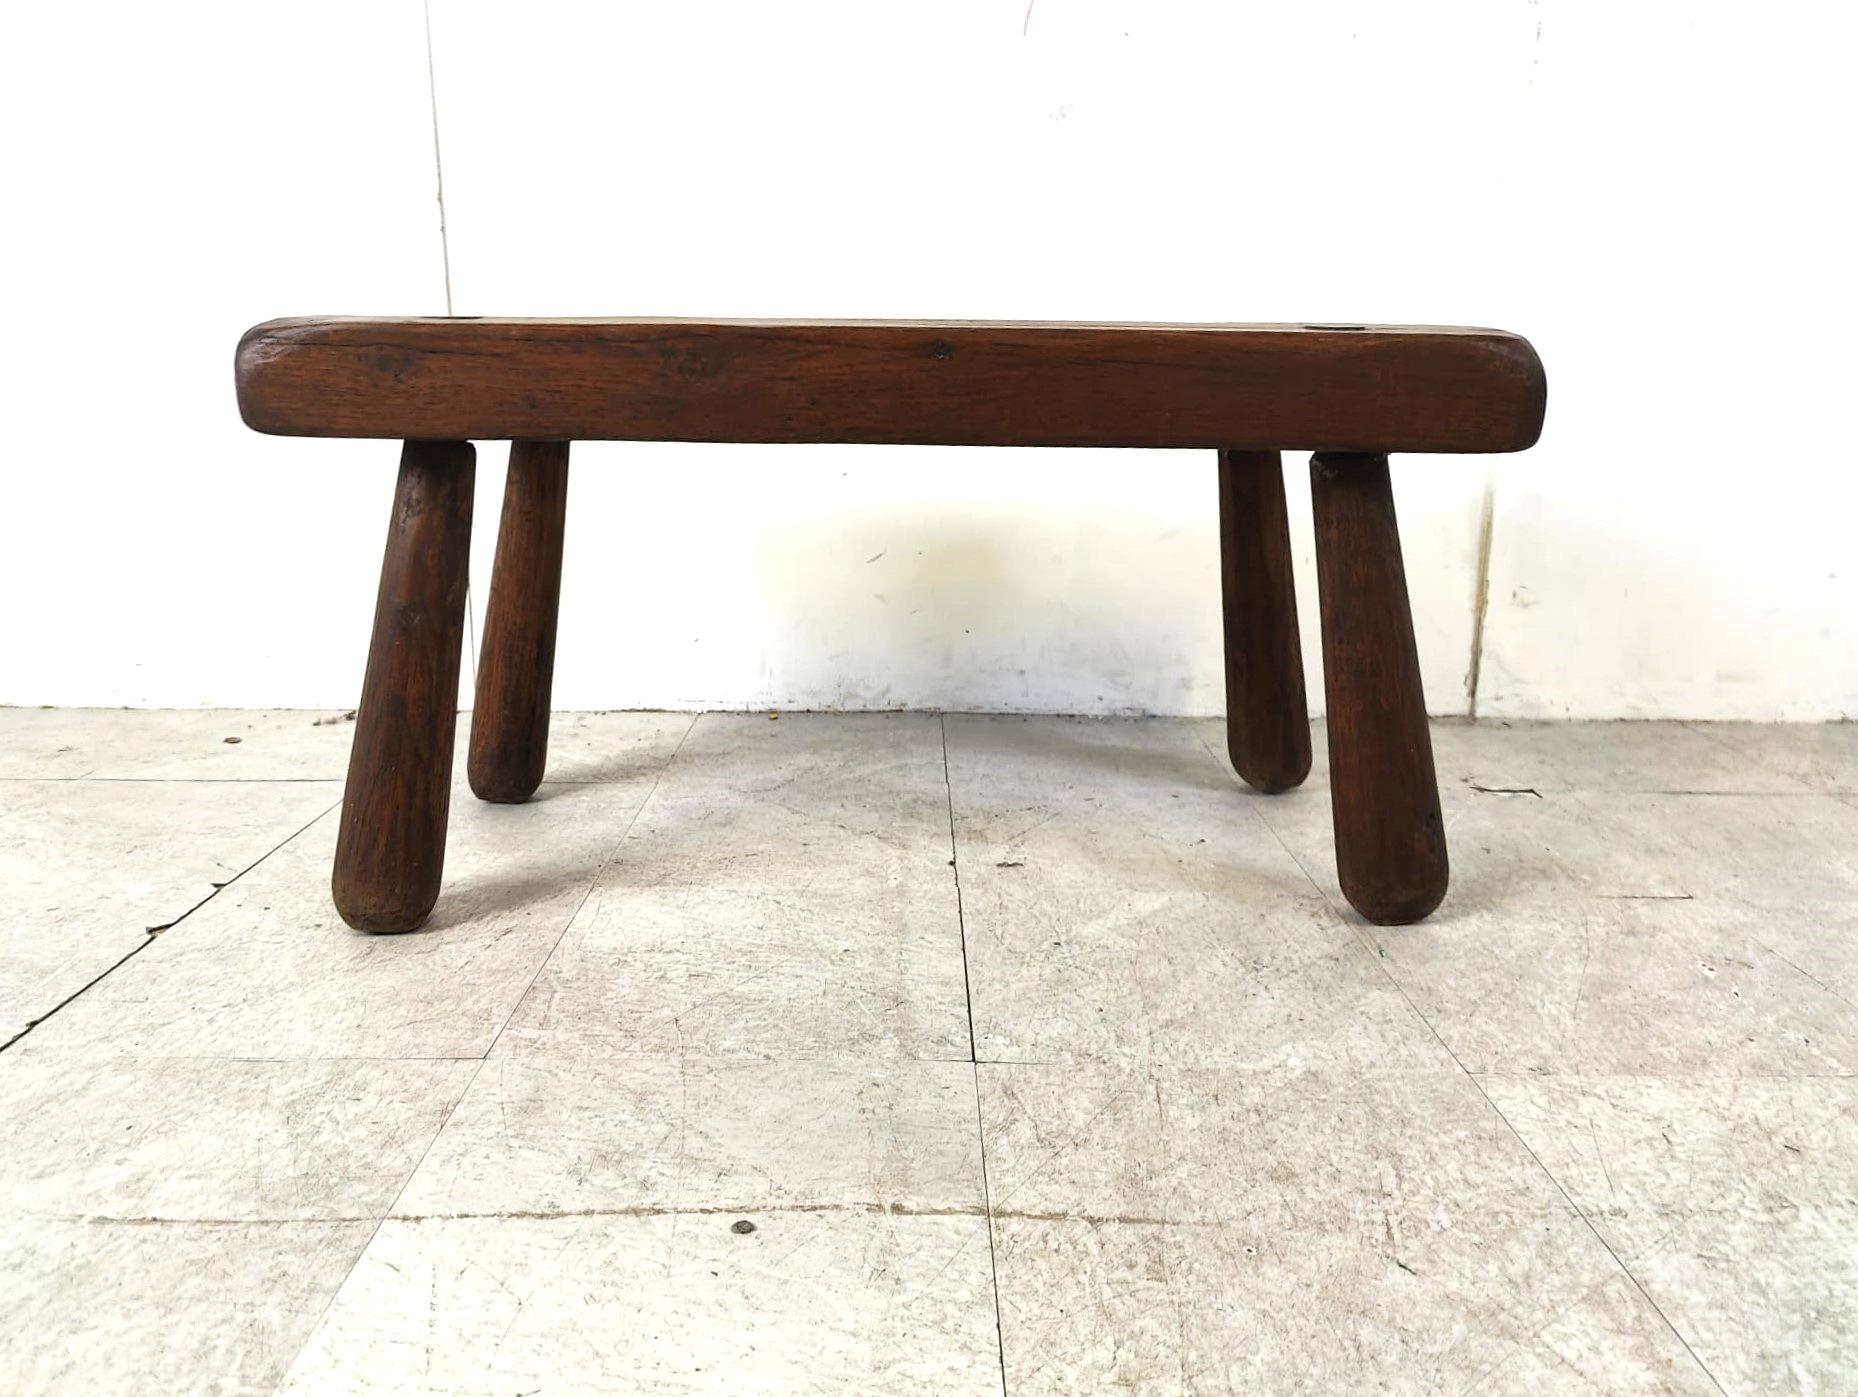 Brutalist 4 legged coffee table with a solid wooden top and interlocking legs.

Great piece to contrast modern day interiros.

Charming patina.

1960s - Belgium

Dimensions:
Height: 46cm
Width: 90cm
Depth: 44cm

Ref.: 302222